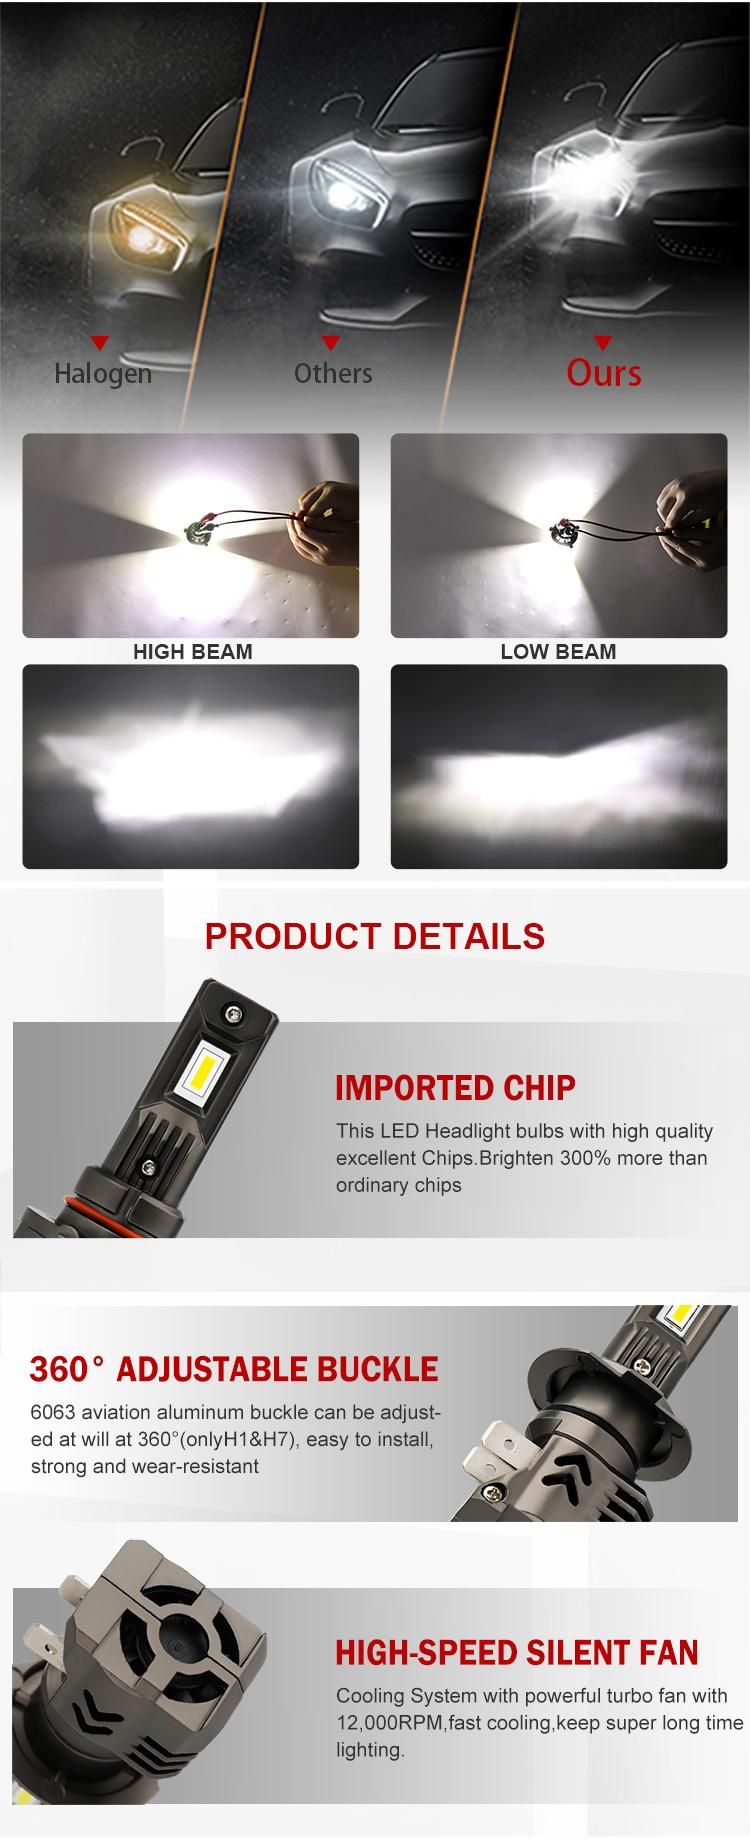 Manufacturer Wholesale Price High Brightness All in One 12V 9012 9006 9005 H4 Auto Car LED Headlights